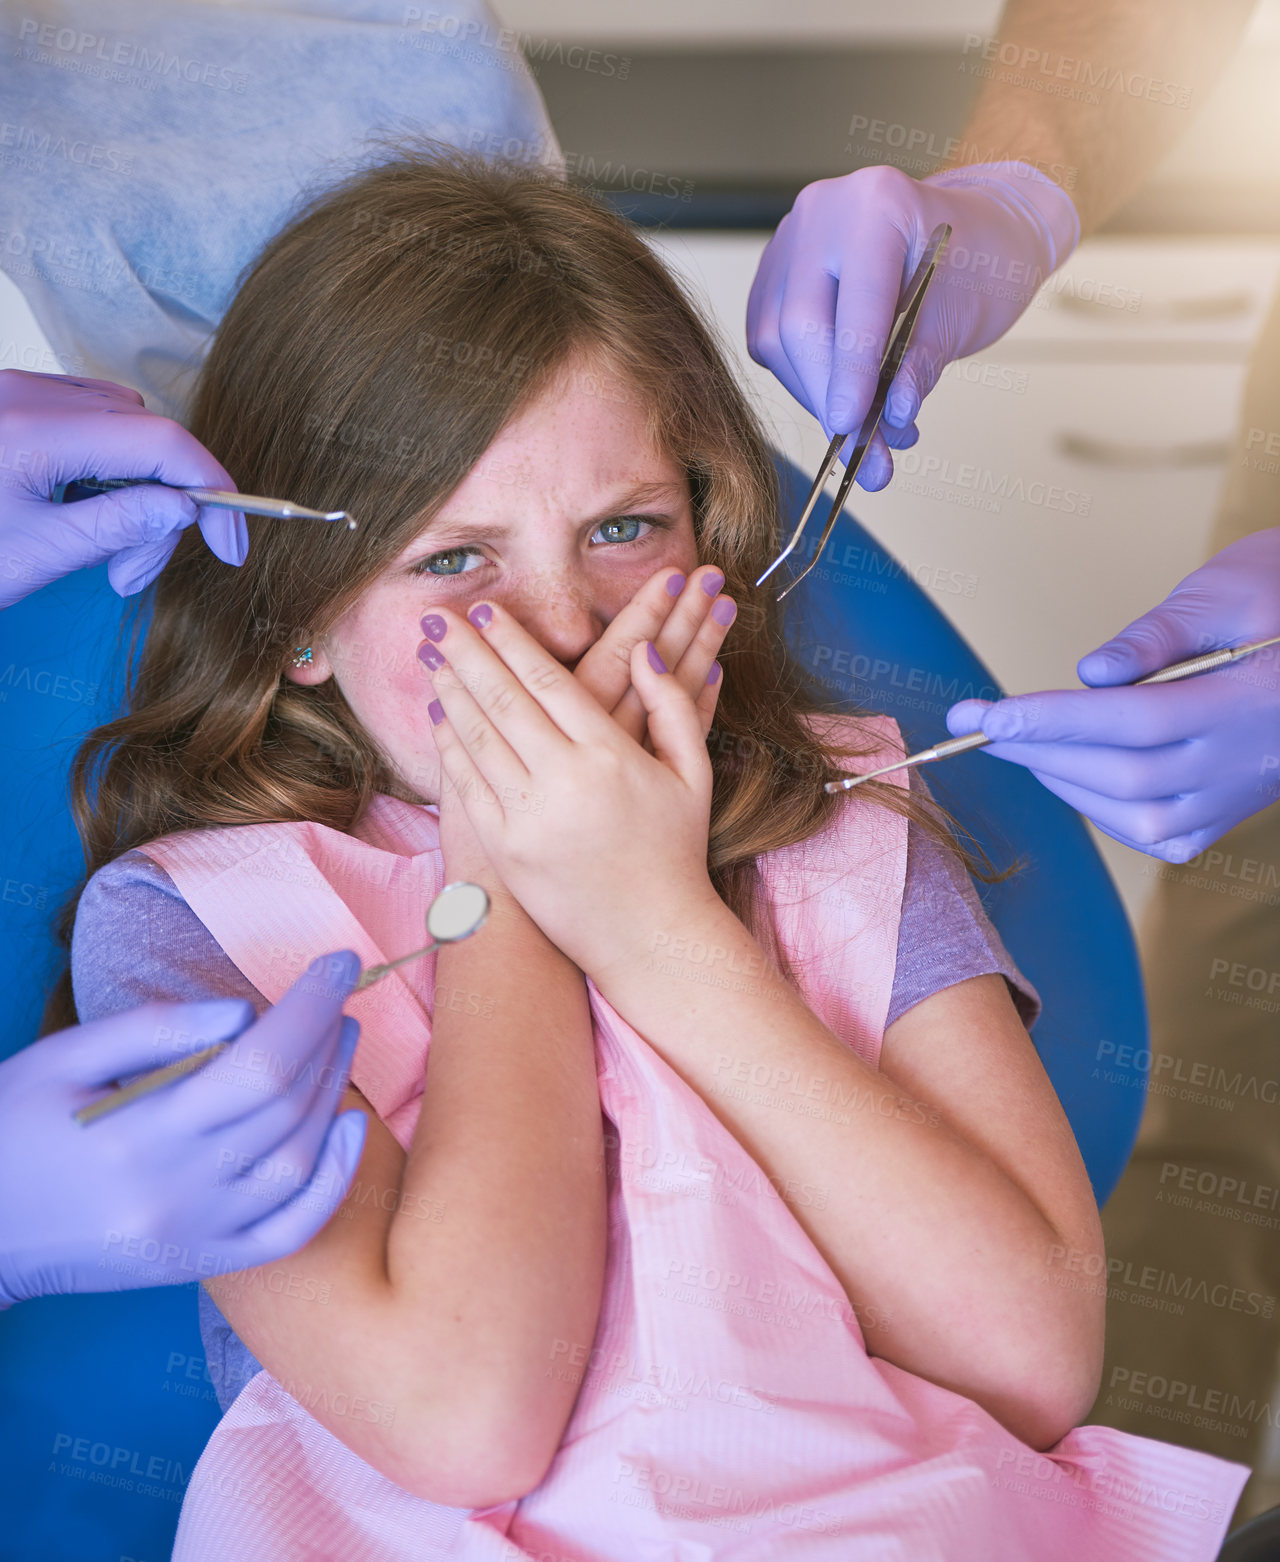 Buy stock photo Shot of a little girl looking terrified as dentists get ready to examine her